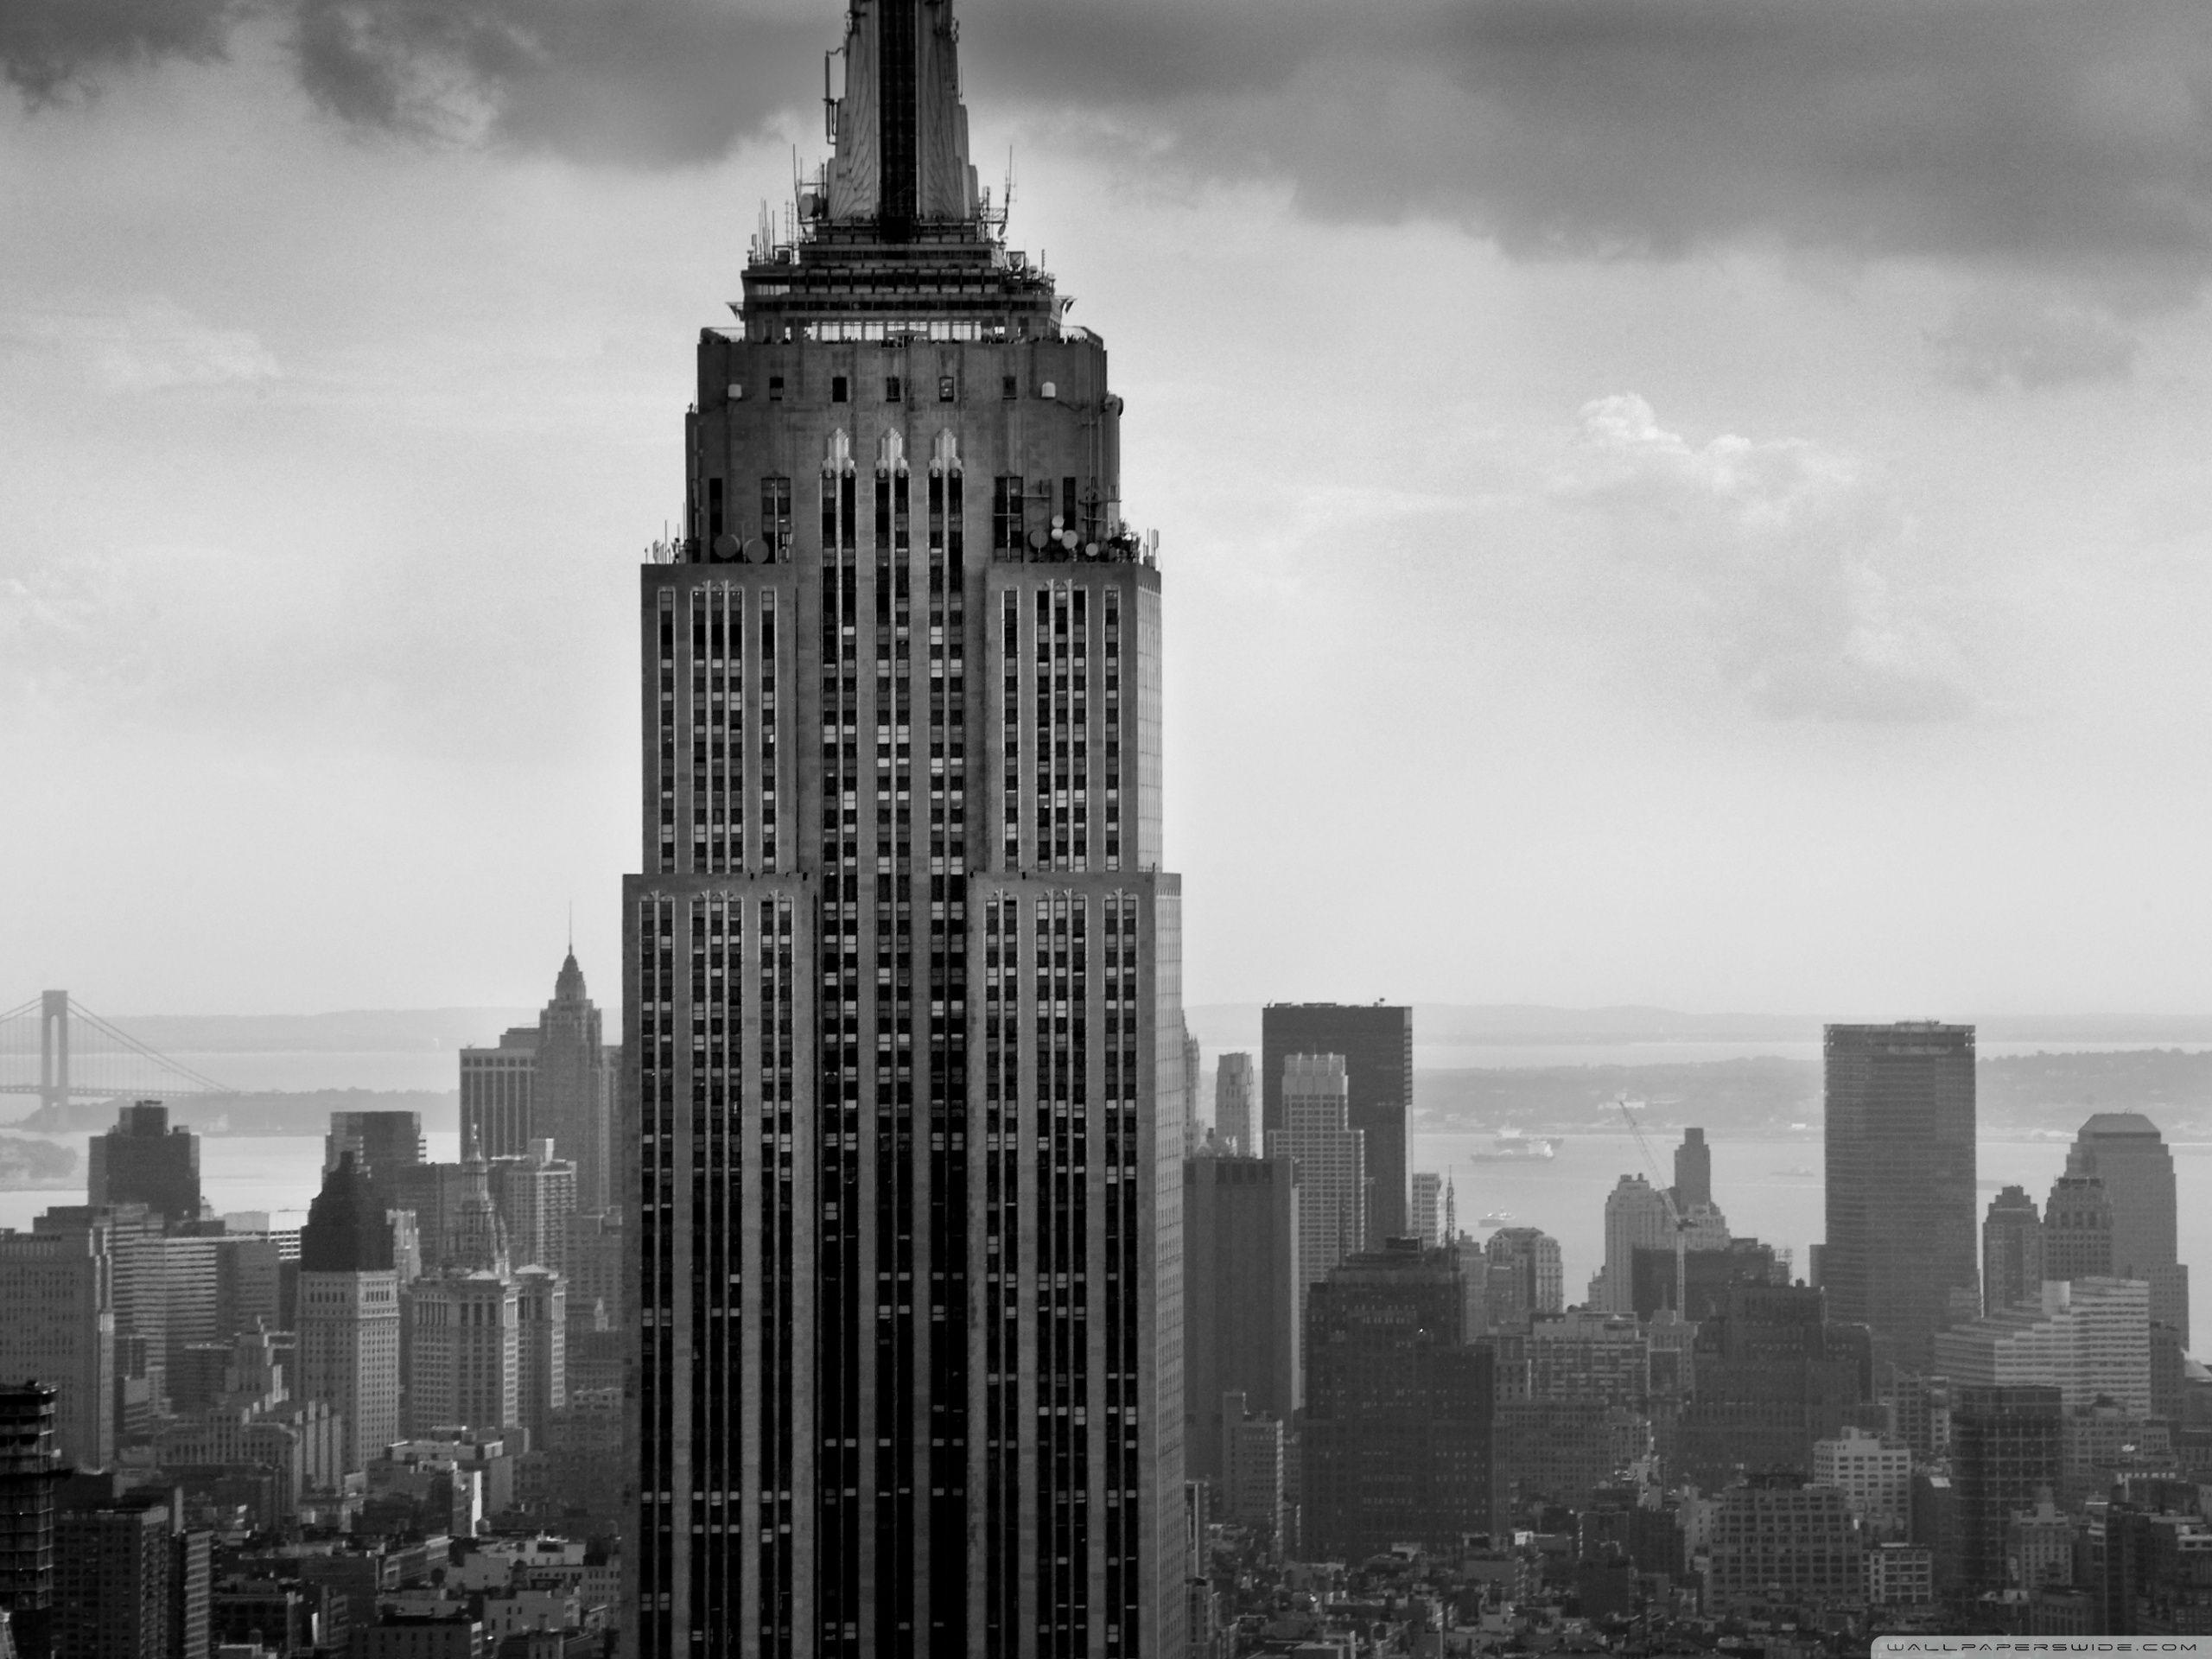 Empire State Building Wallpapers